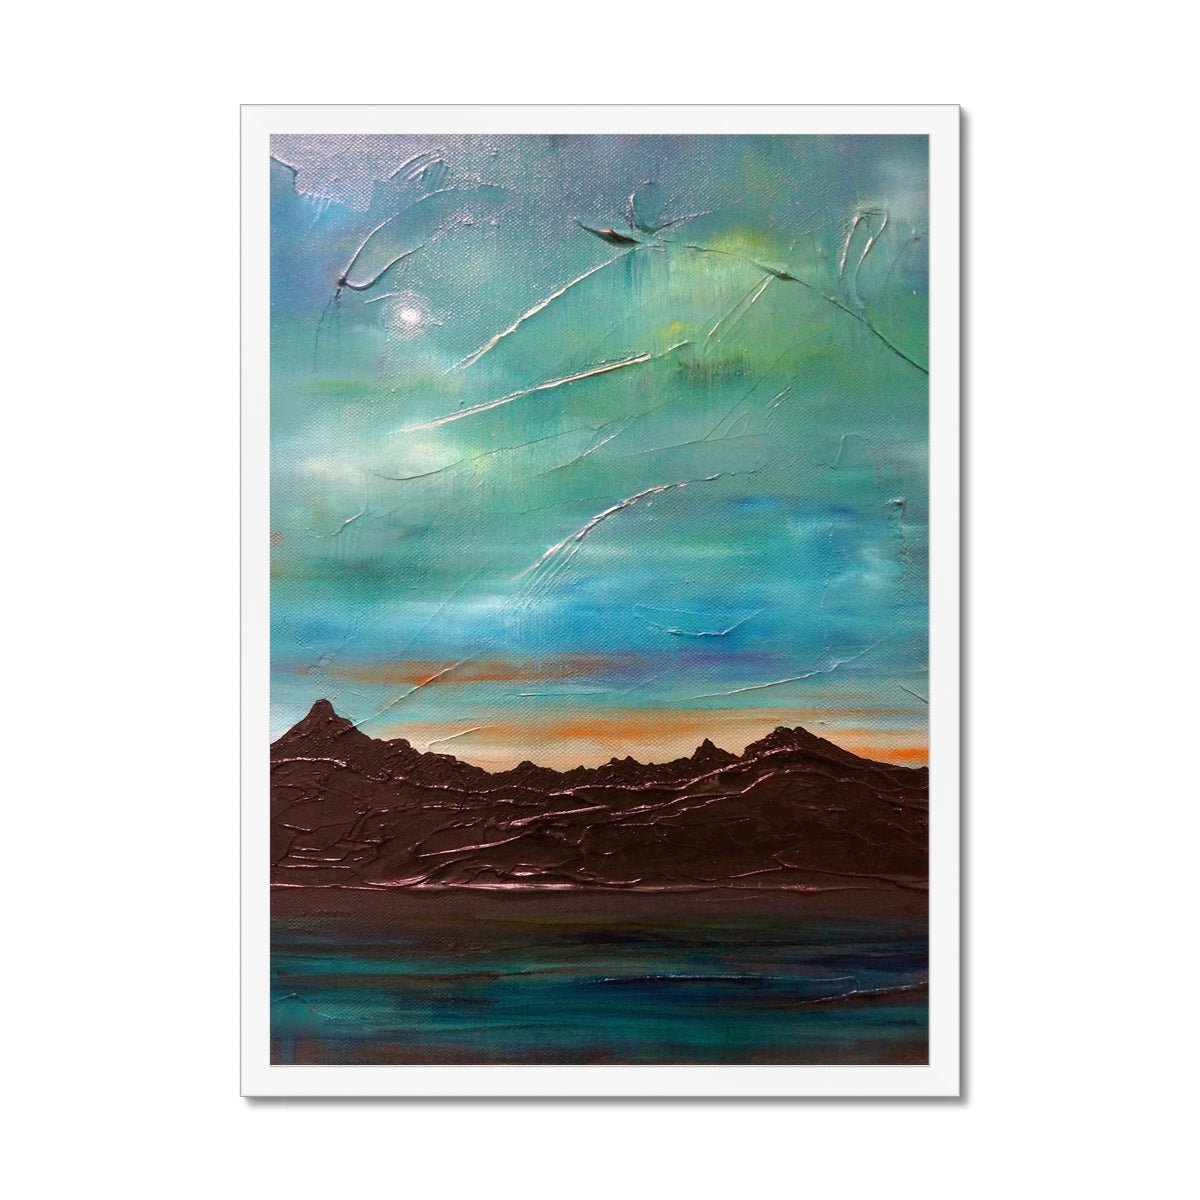 The Cuillin From Elgol Skye Painting | Framed Prints From Scotland-Framed Prints-Skye Art Gallery-A2 Portrait-White Frame-Paintings, Prints, Homeware, Art Gifts From Scotland By Scottish Artist Kevin Hunter